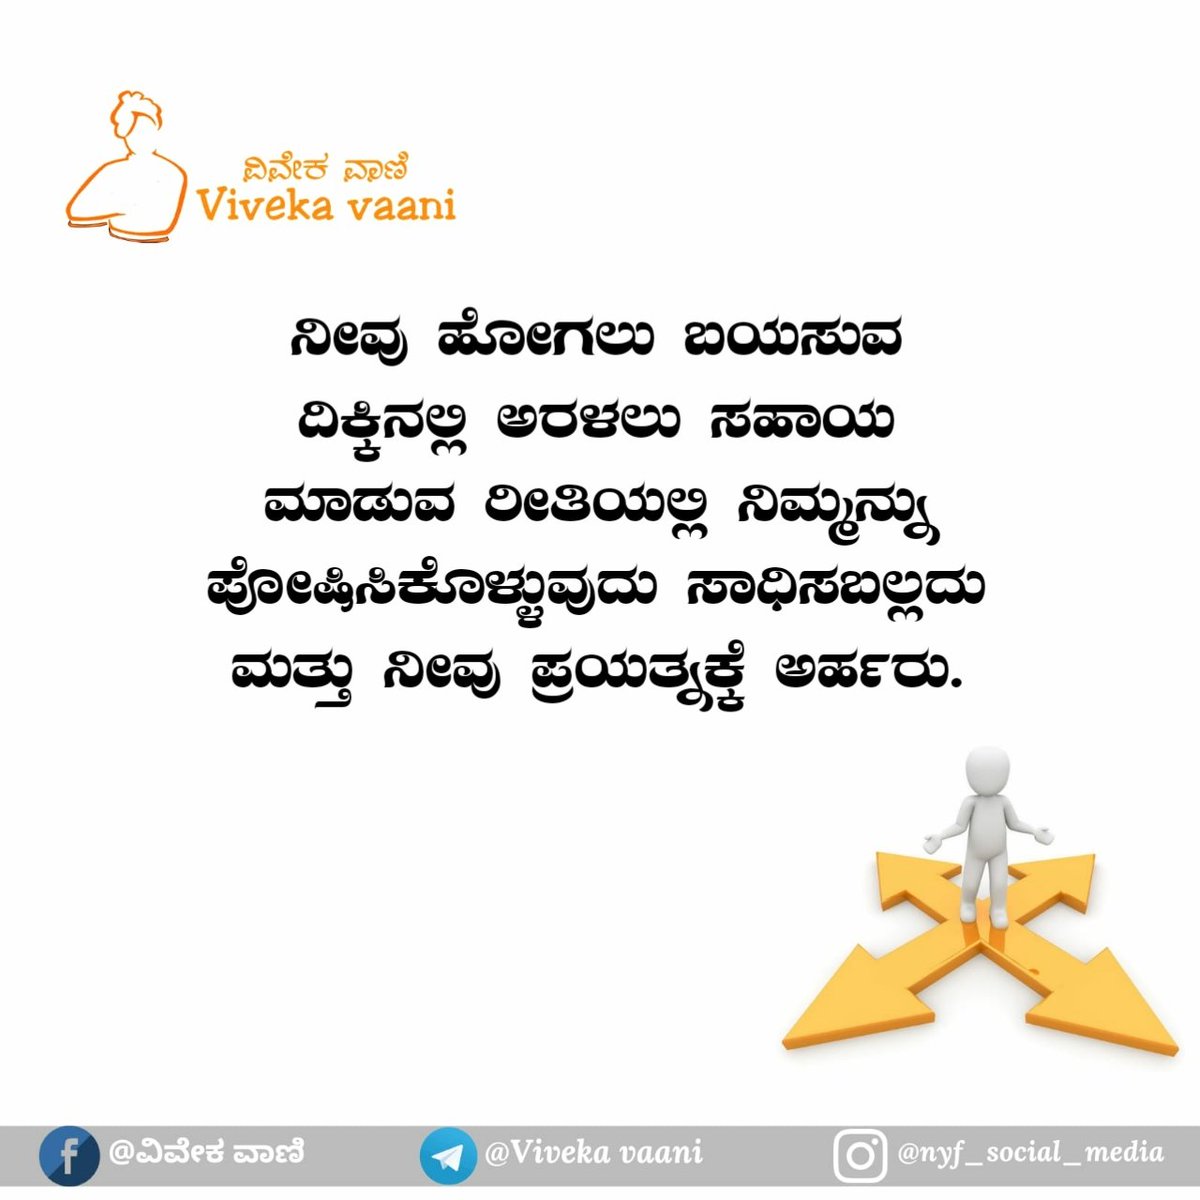 #Viveka_vaani #NYF #unique #uniqueness #uniquenessisbeautiful #uniquenessisouridentity #uniquenessmatters #challengeaccepted #challenges #quotesaboutlife #quotes #thoughts #positivevibes #positivequotes #motivation #navratri #karnataka #kannada #bharat #goodmorning